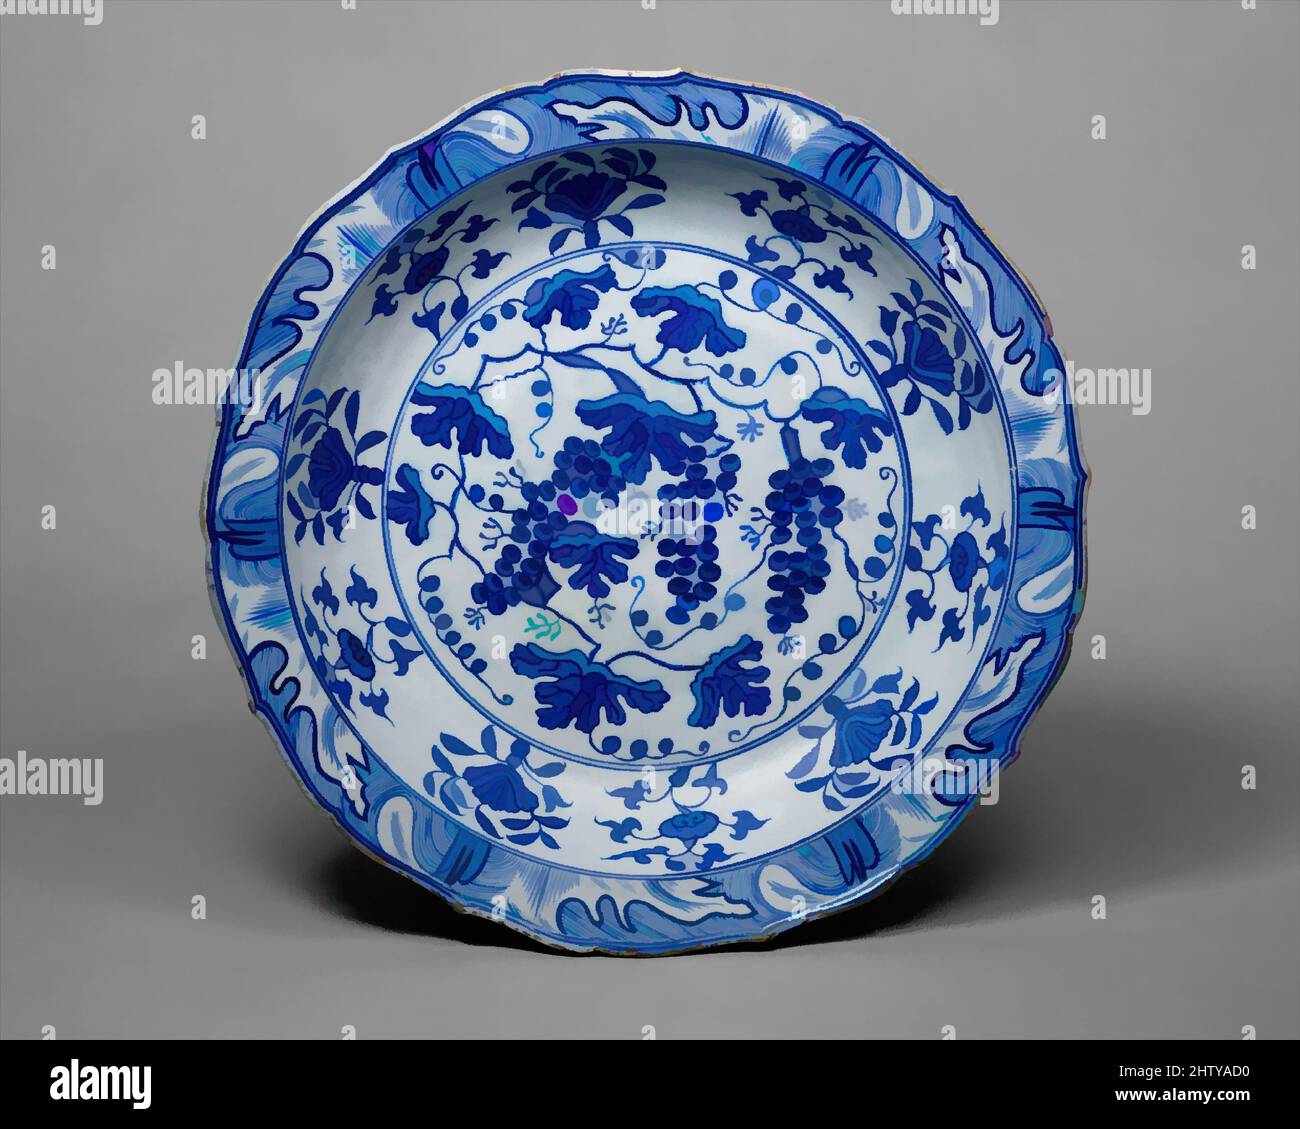 Art inspired by Dish, second quarter 16th century, Made in Turkey, Iznik, Stonepaste; painted under transparent glaze, H. 2 5/8 in. (6.7 cm), Ceramics, Classic works modernized by Artotop with a splash of modernity. Shapes, color and value, eye-catching visual impact on art. Emotions through freedom of artworks in a contemporary way. A timeless message pursuing a wildly creative new direction. Artists turning to the digital medium and creating the Artotop NFT Stock Photo